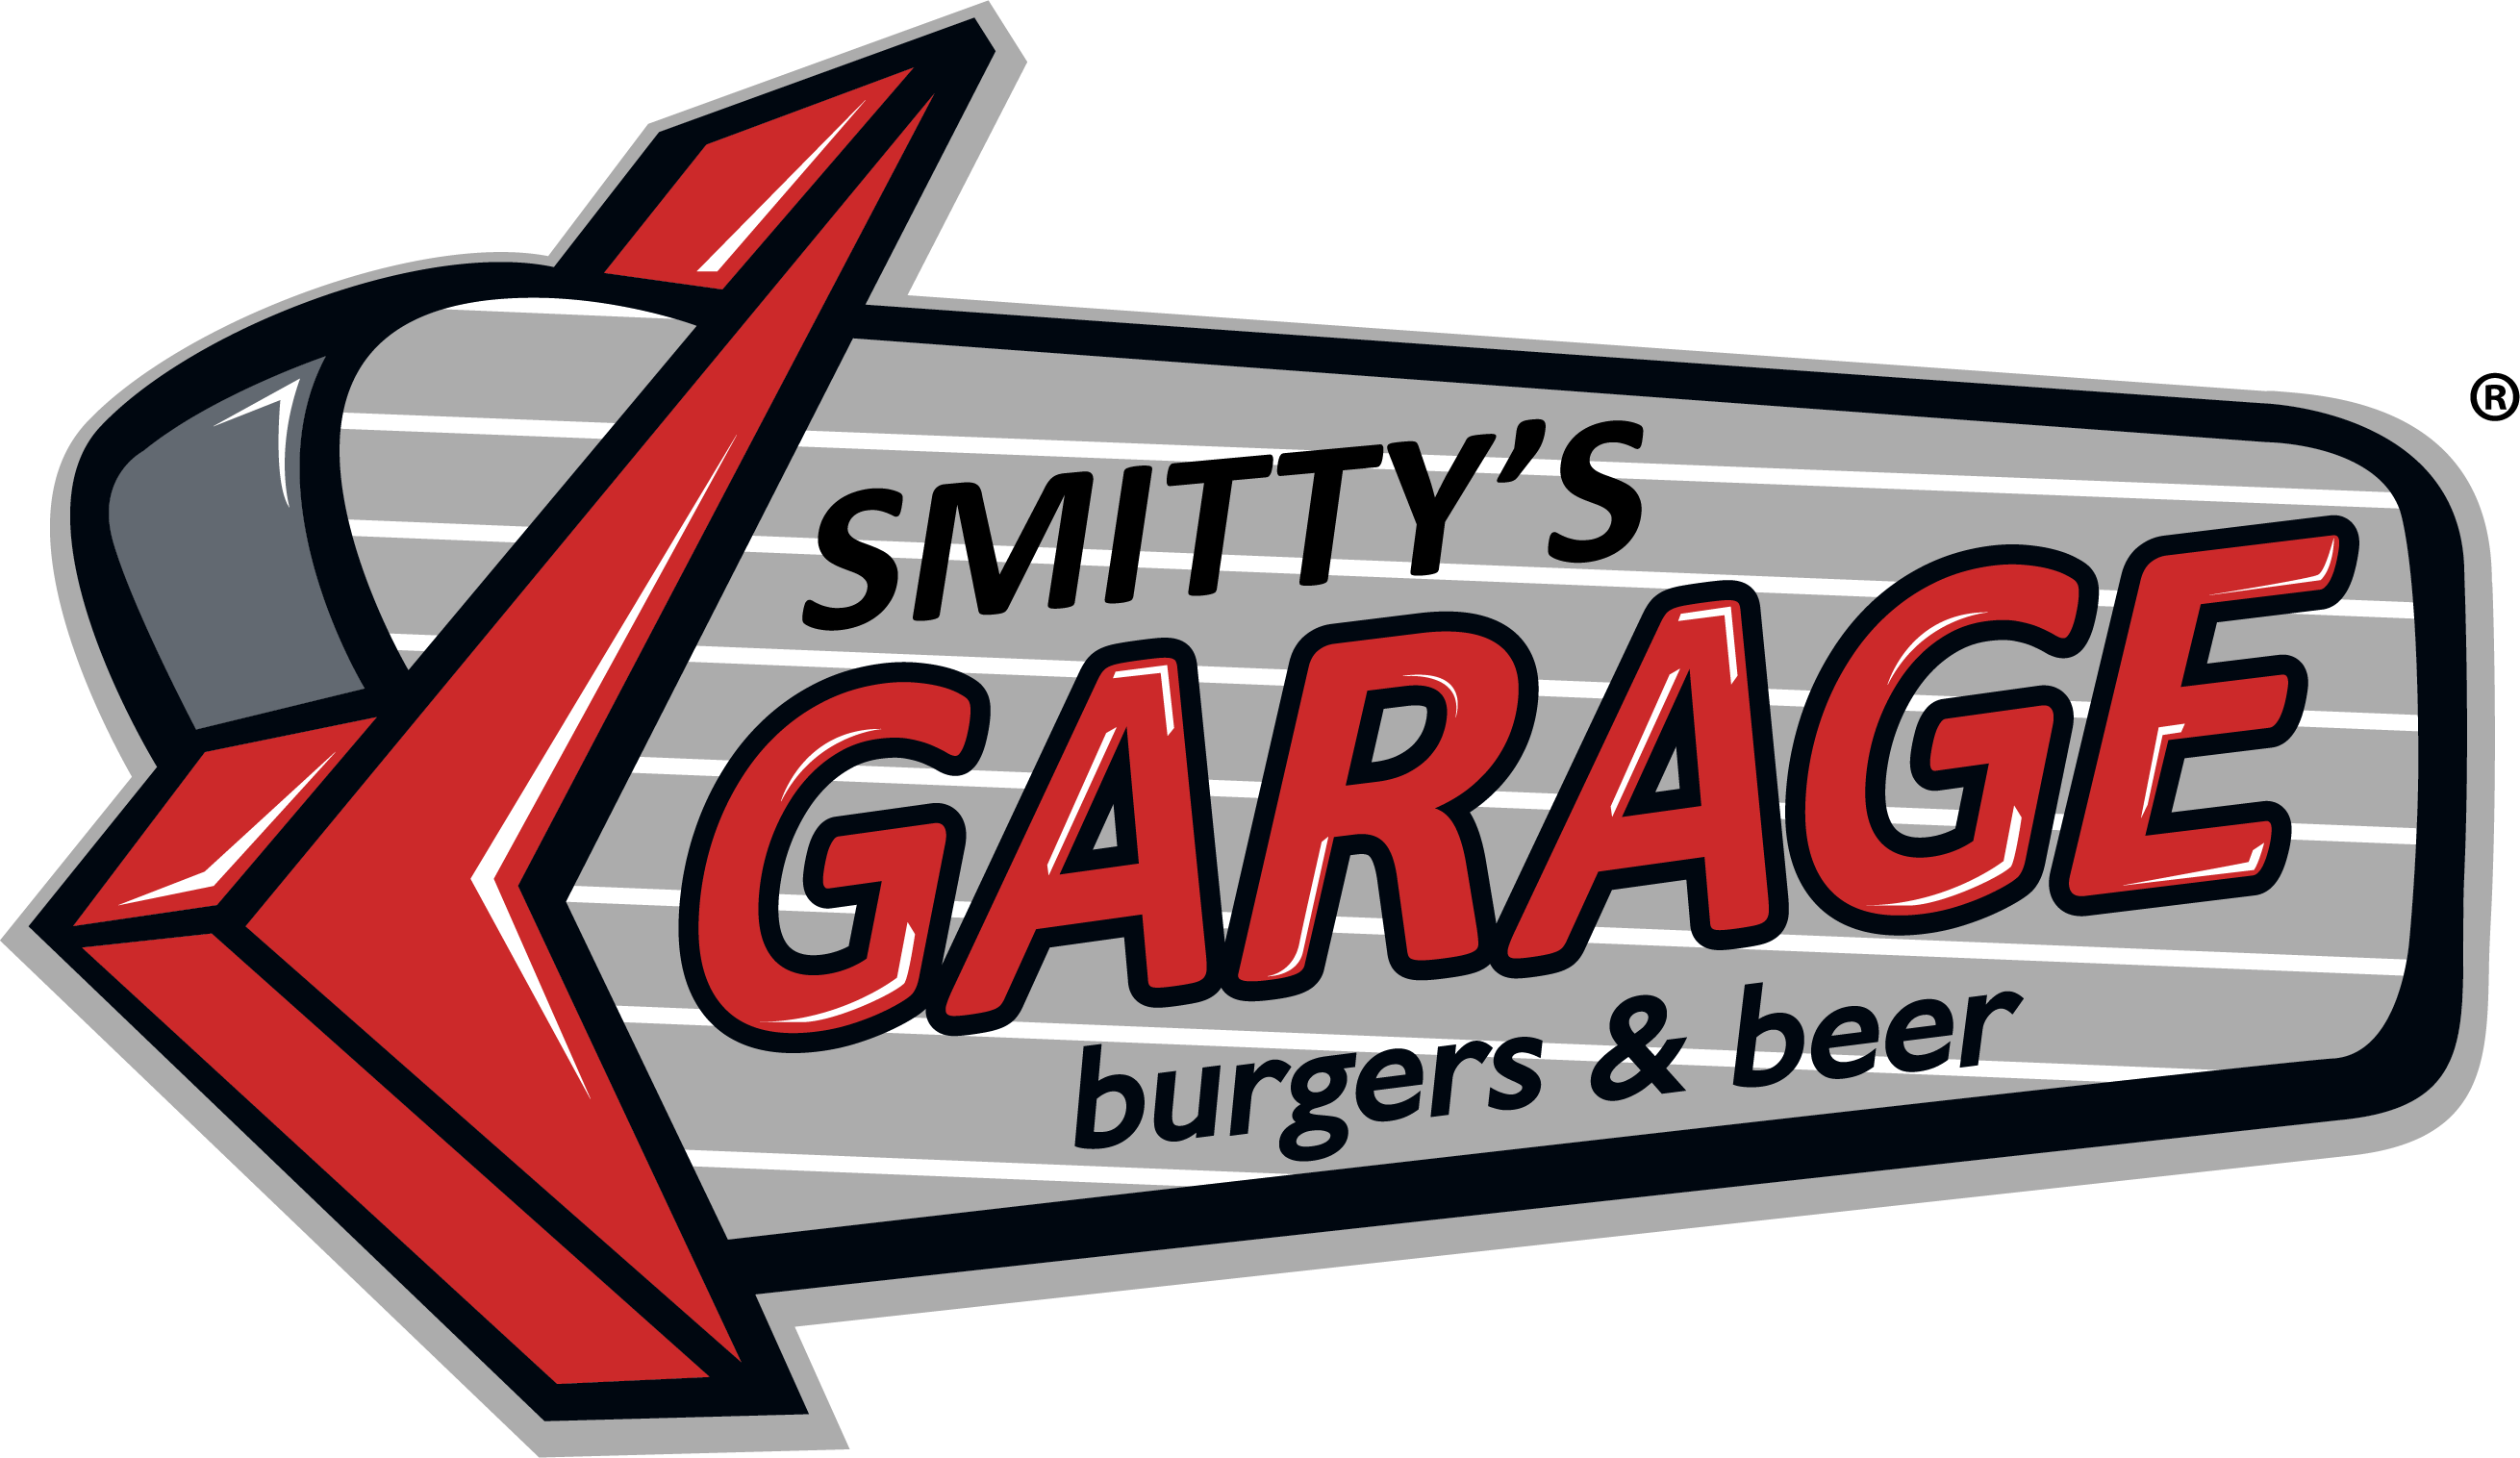 Burgers Logo - The Garage | Get the Finest Burgers and Hamburgers in Town